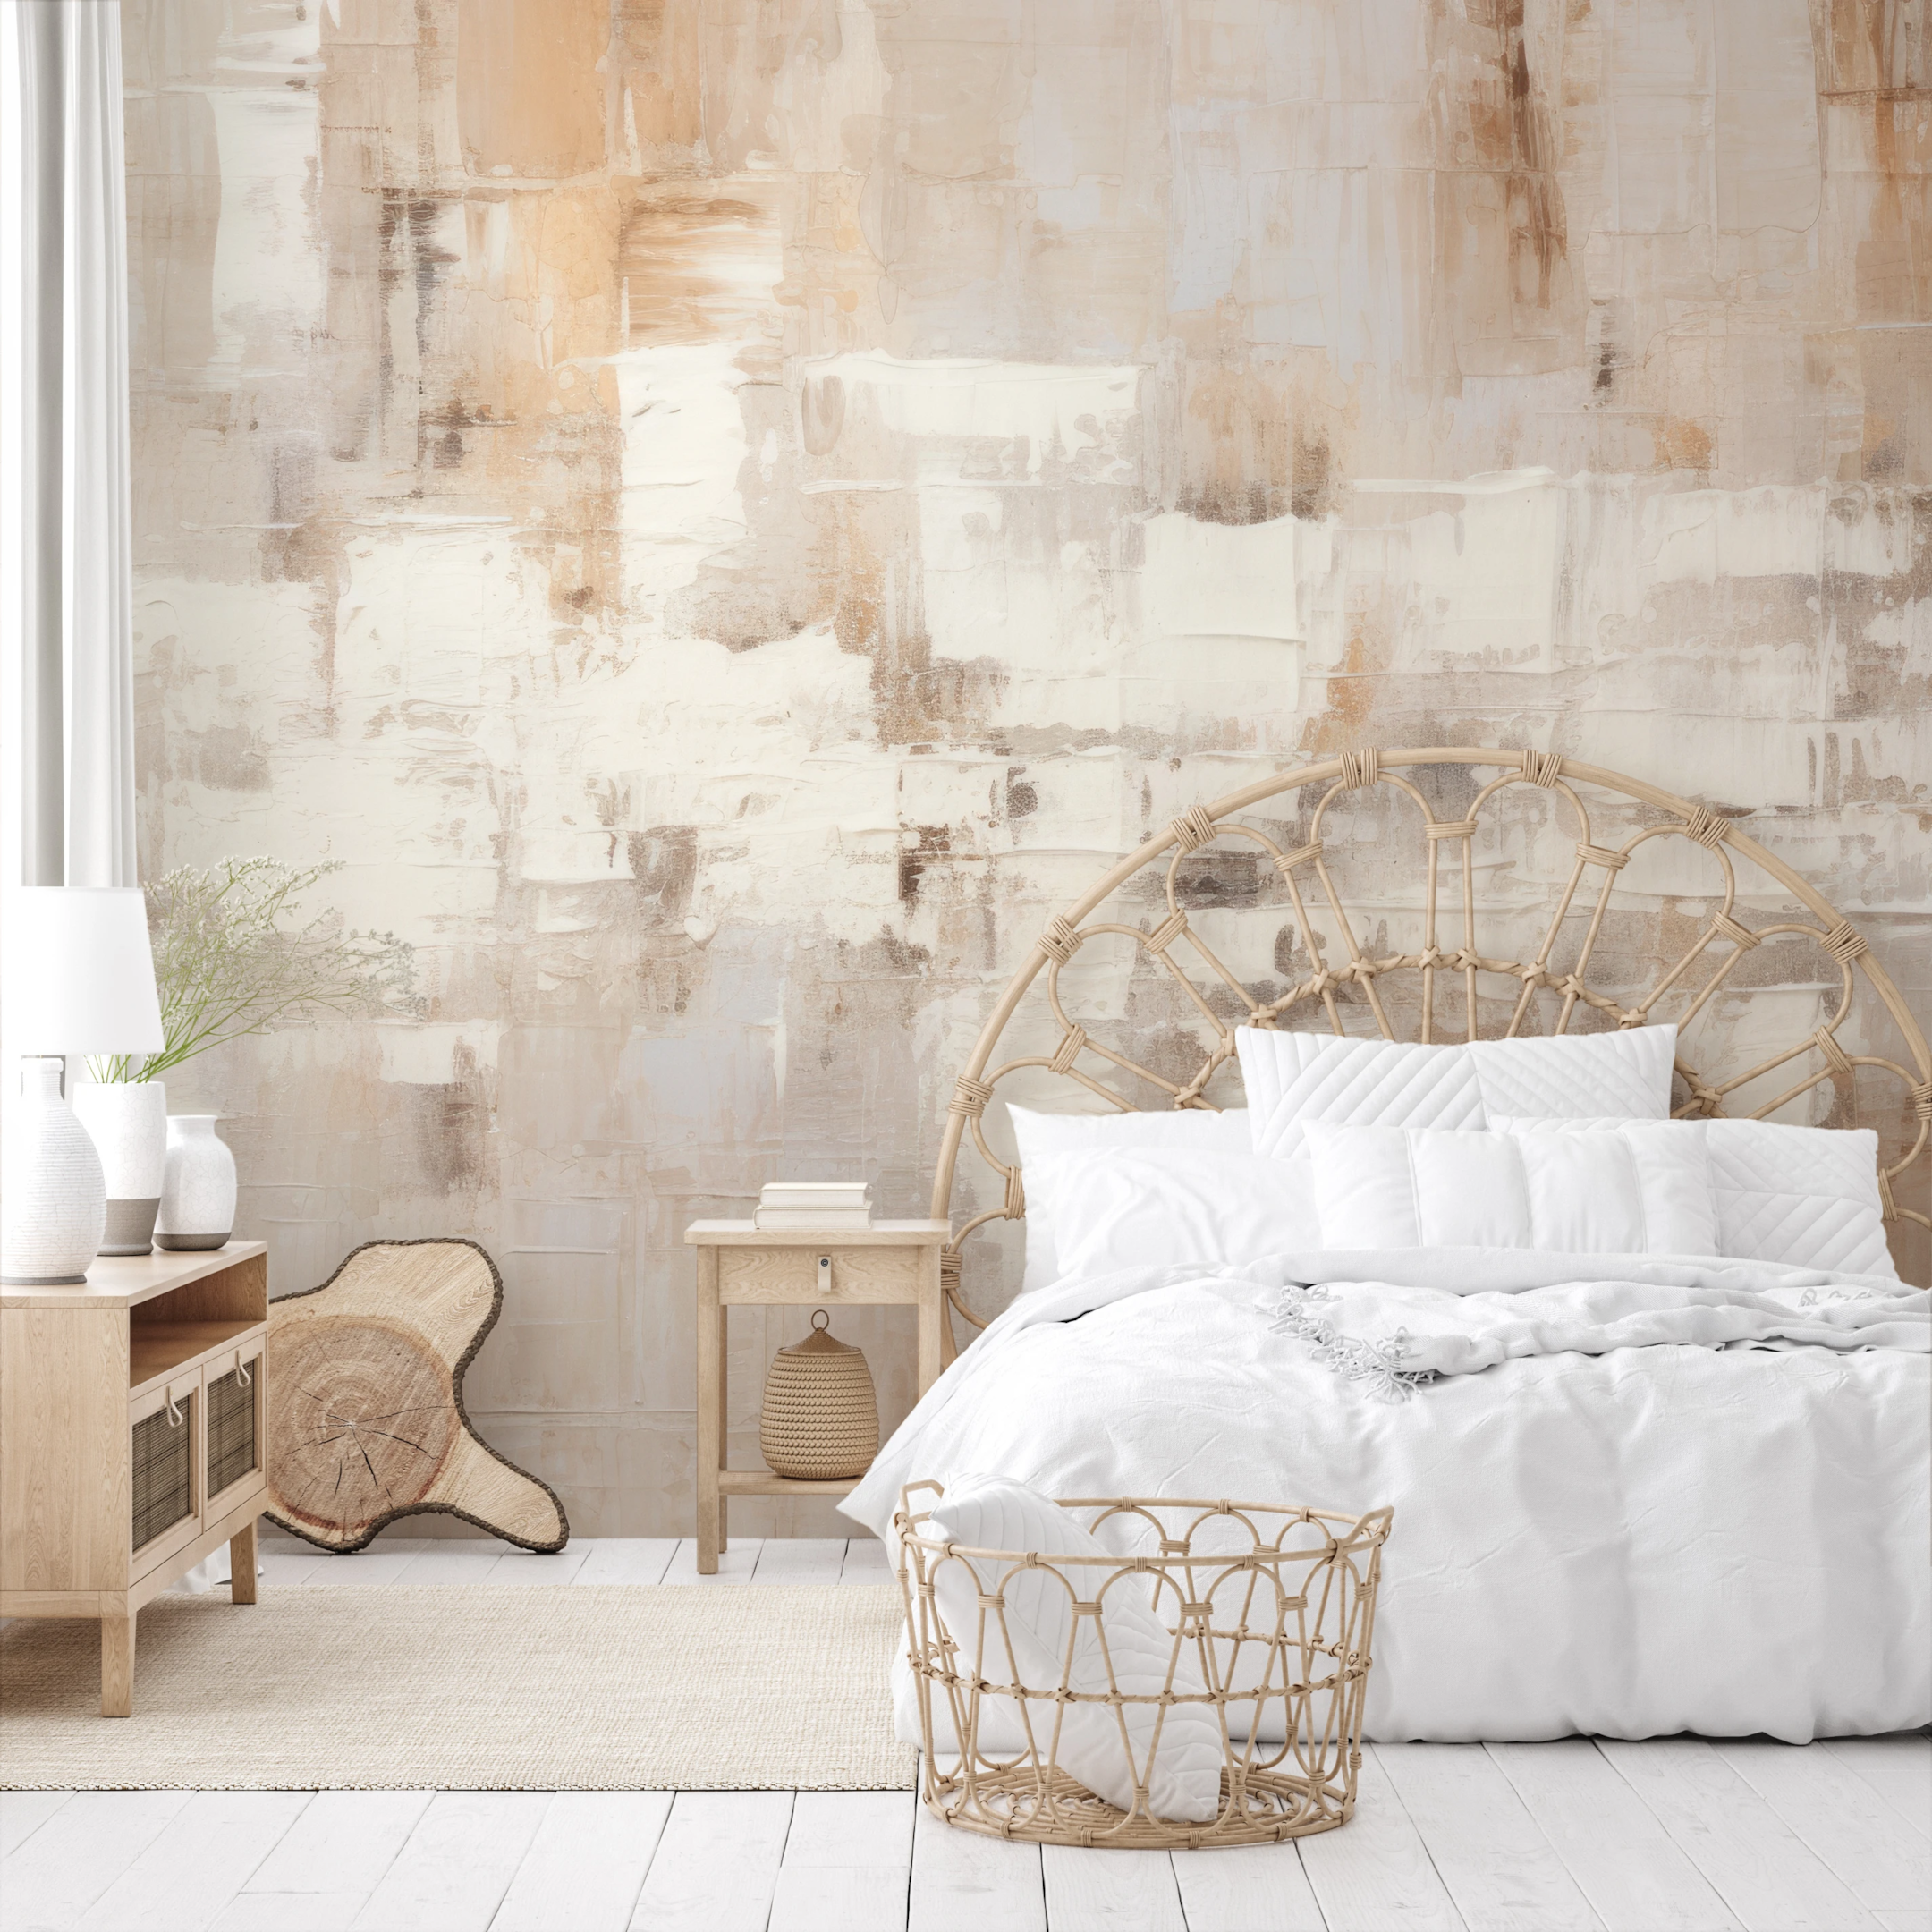 The "Abstract Parchment" photo wallpaper is an abstract interpretation of ancient parchment, where the canvas is covered with irregular, abstract forms in shades of beige, cream and gray.